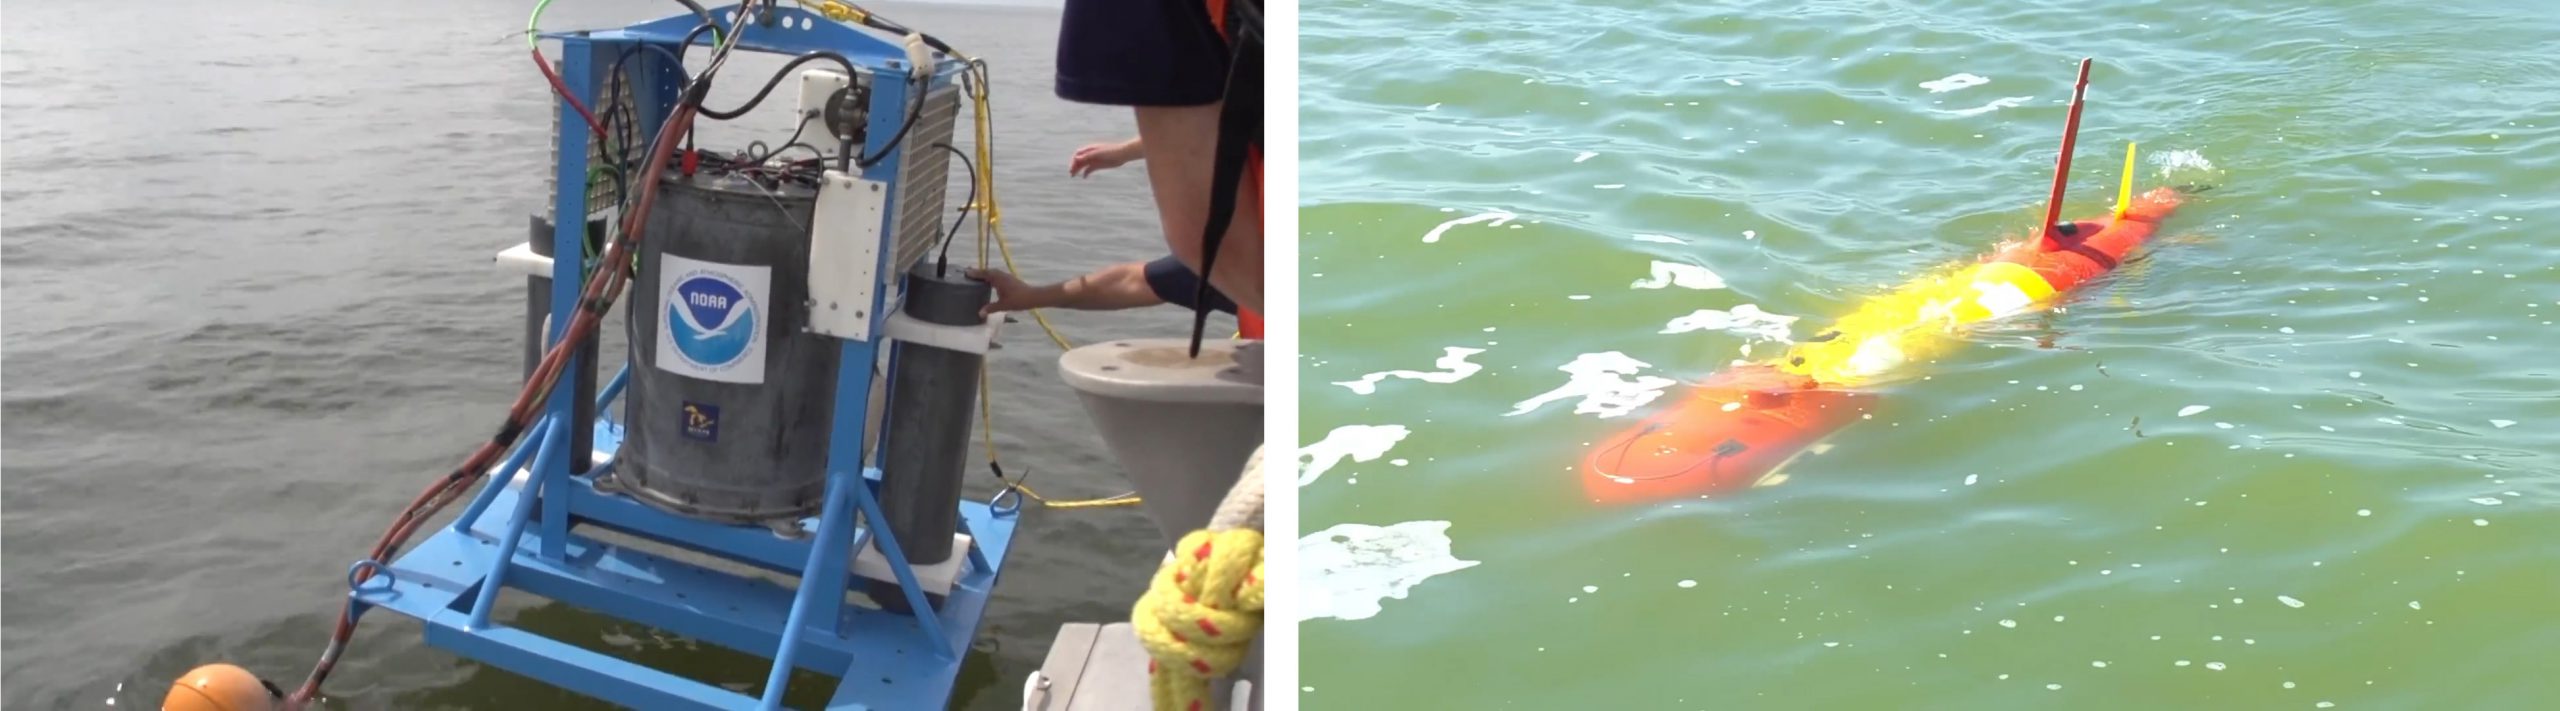 LEFT: The moored Environmental Sample Processor (ESP) being deployed in Lake Erie. RIGHT: The autonomous underwater vehicle ESP. The mobility of this system allows it to provide toxin monitoring over a larger area than the moored ESP.